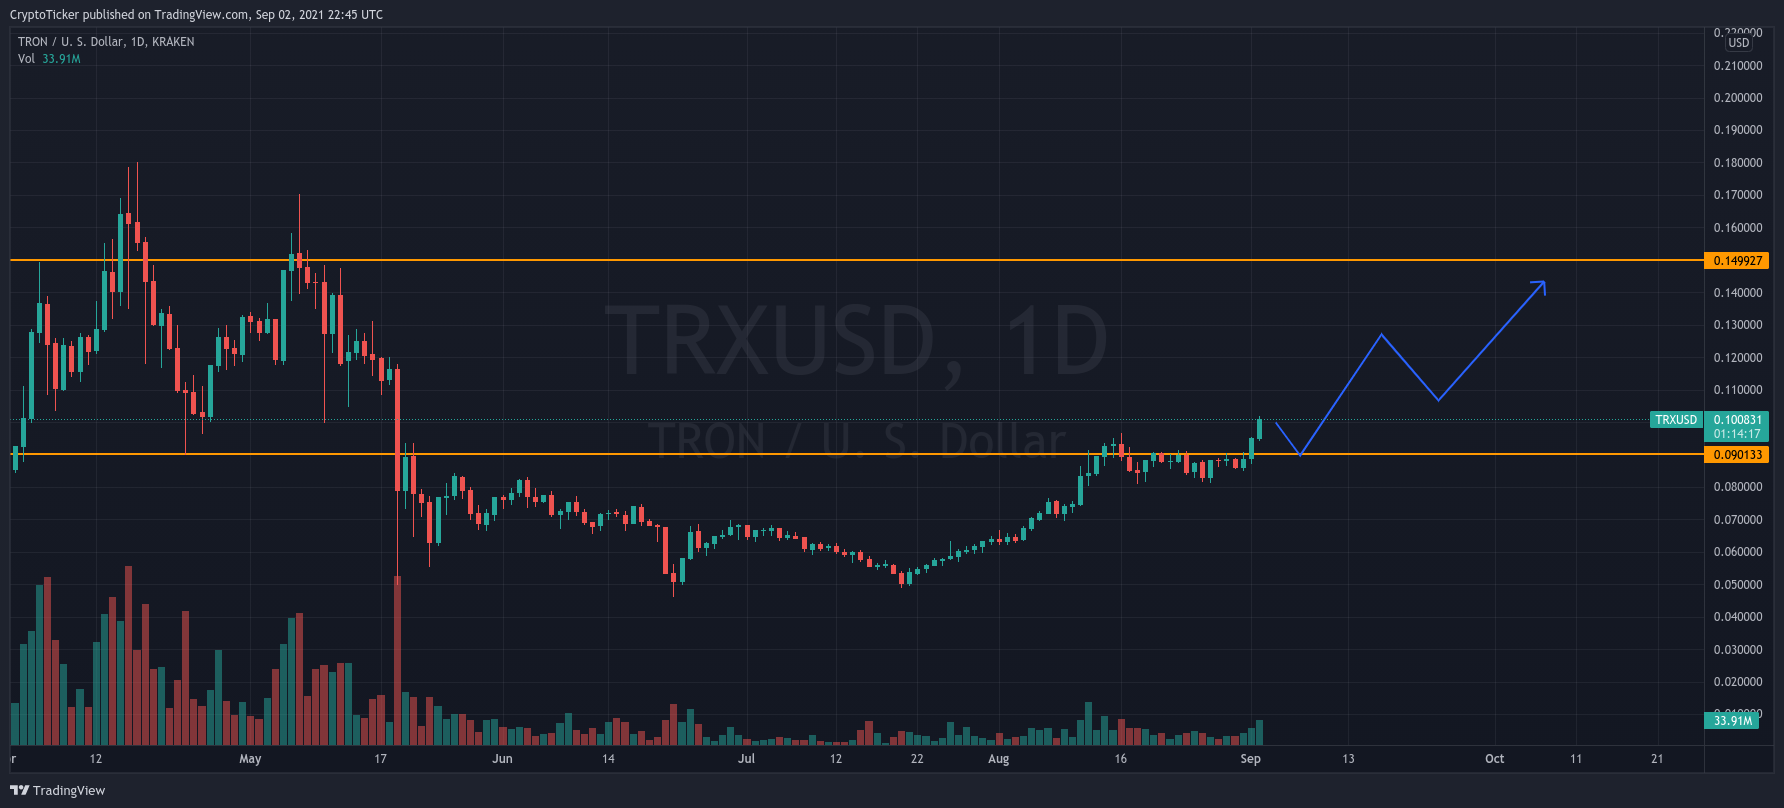 TRX/USD 1-day chart showing the target price area for TRX